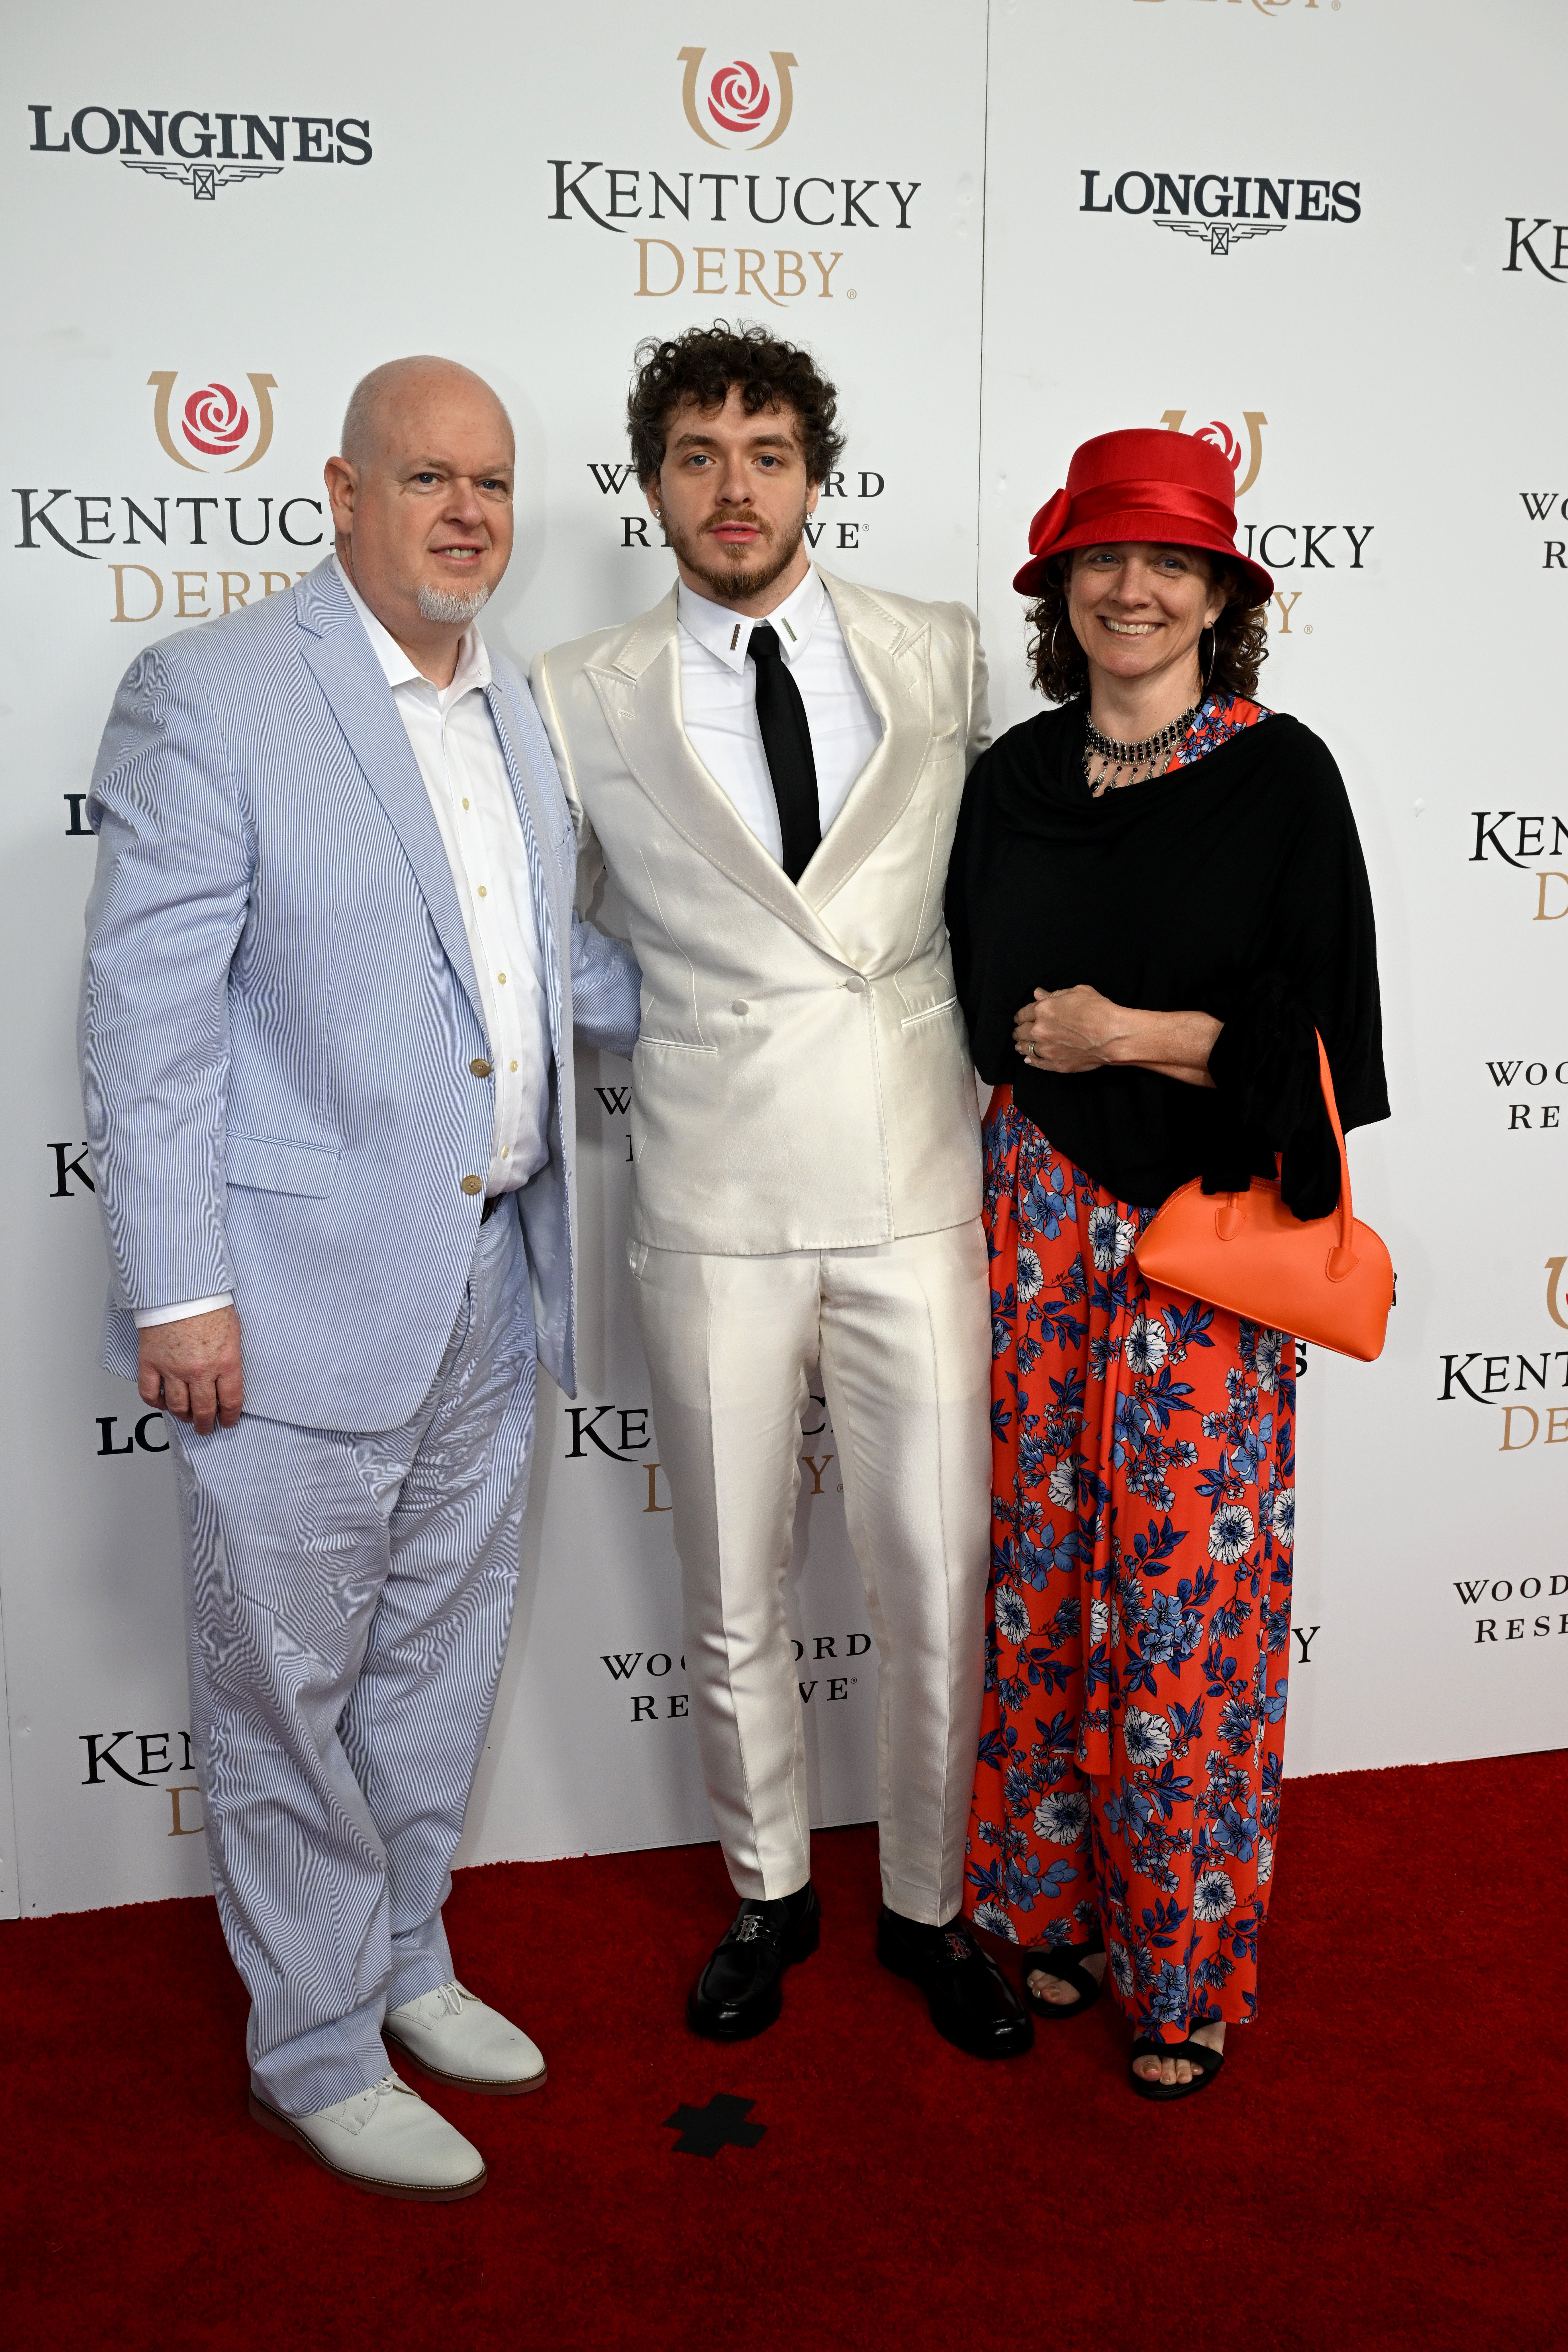 Brian Harlow, Jack Harlow, and Maggie Harlow at Churchill Downs on May 07, 2022, in Louisville, Kentucky. | Source: Getty Images